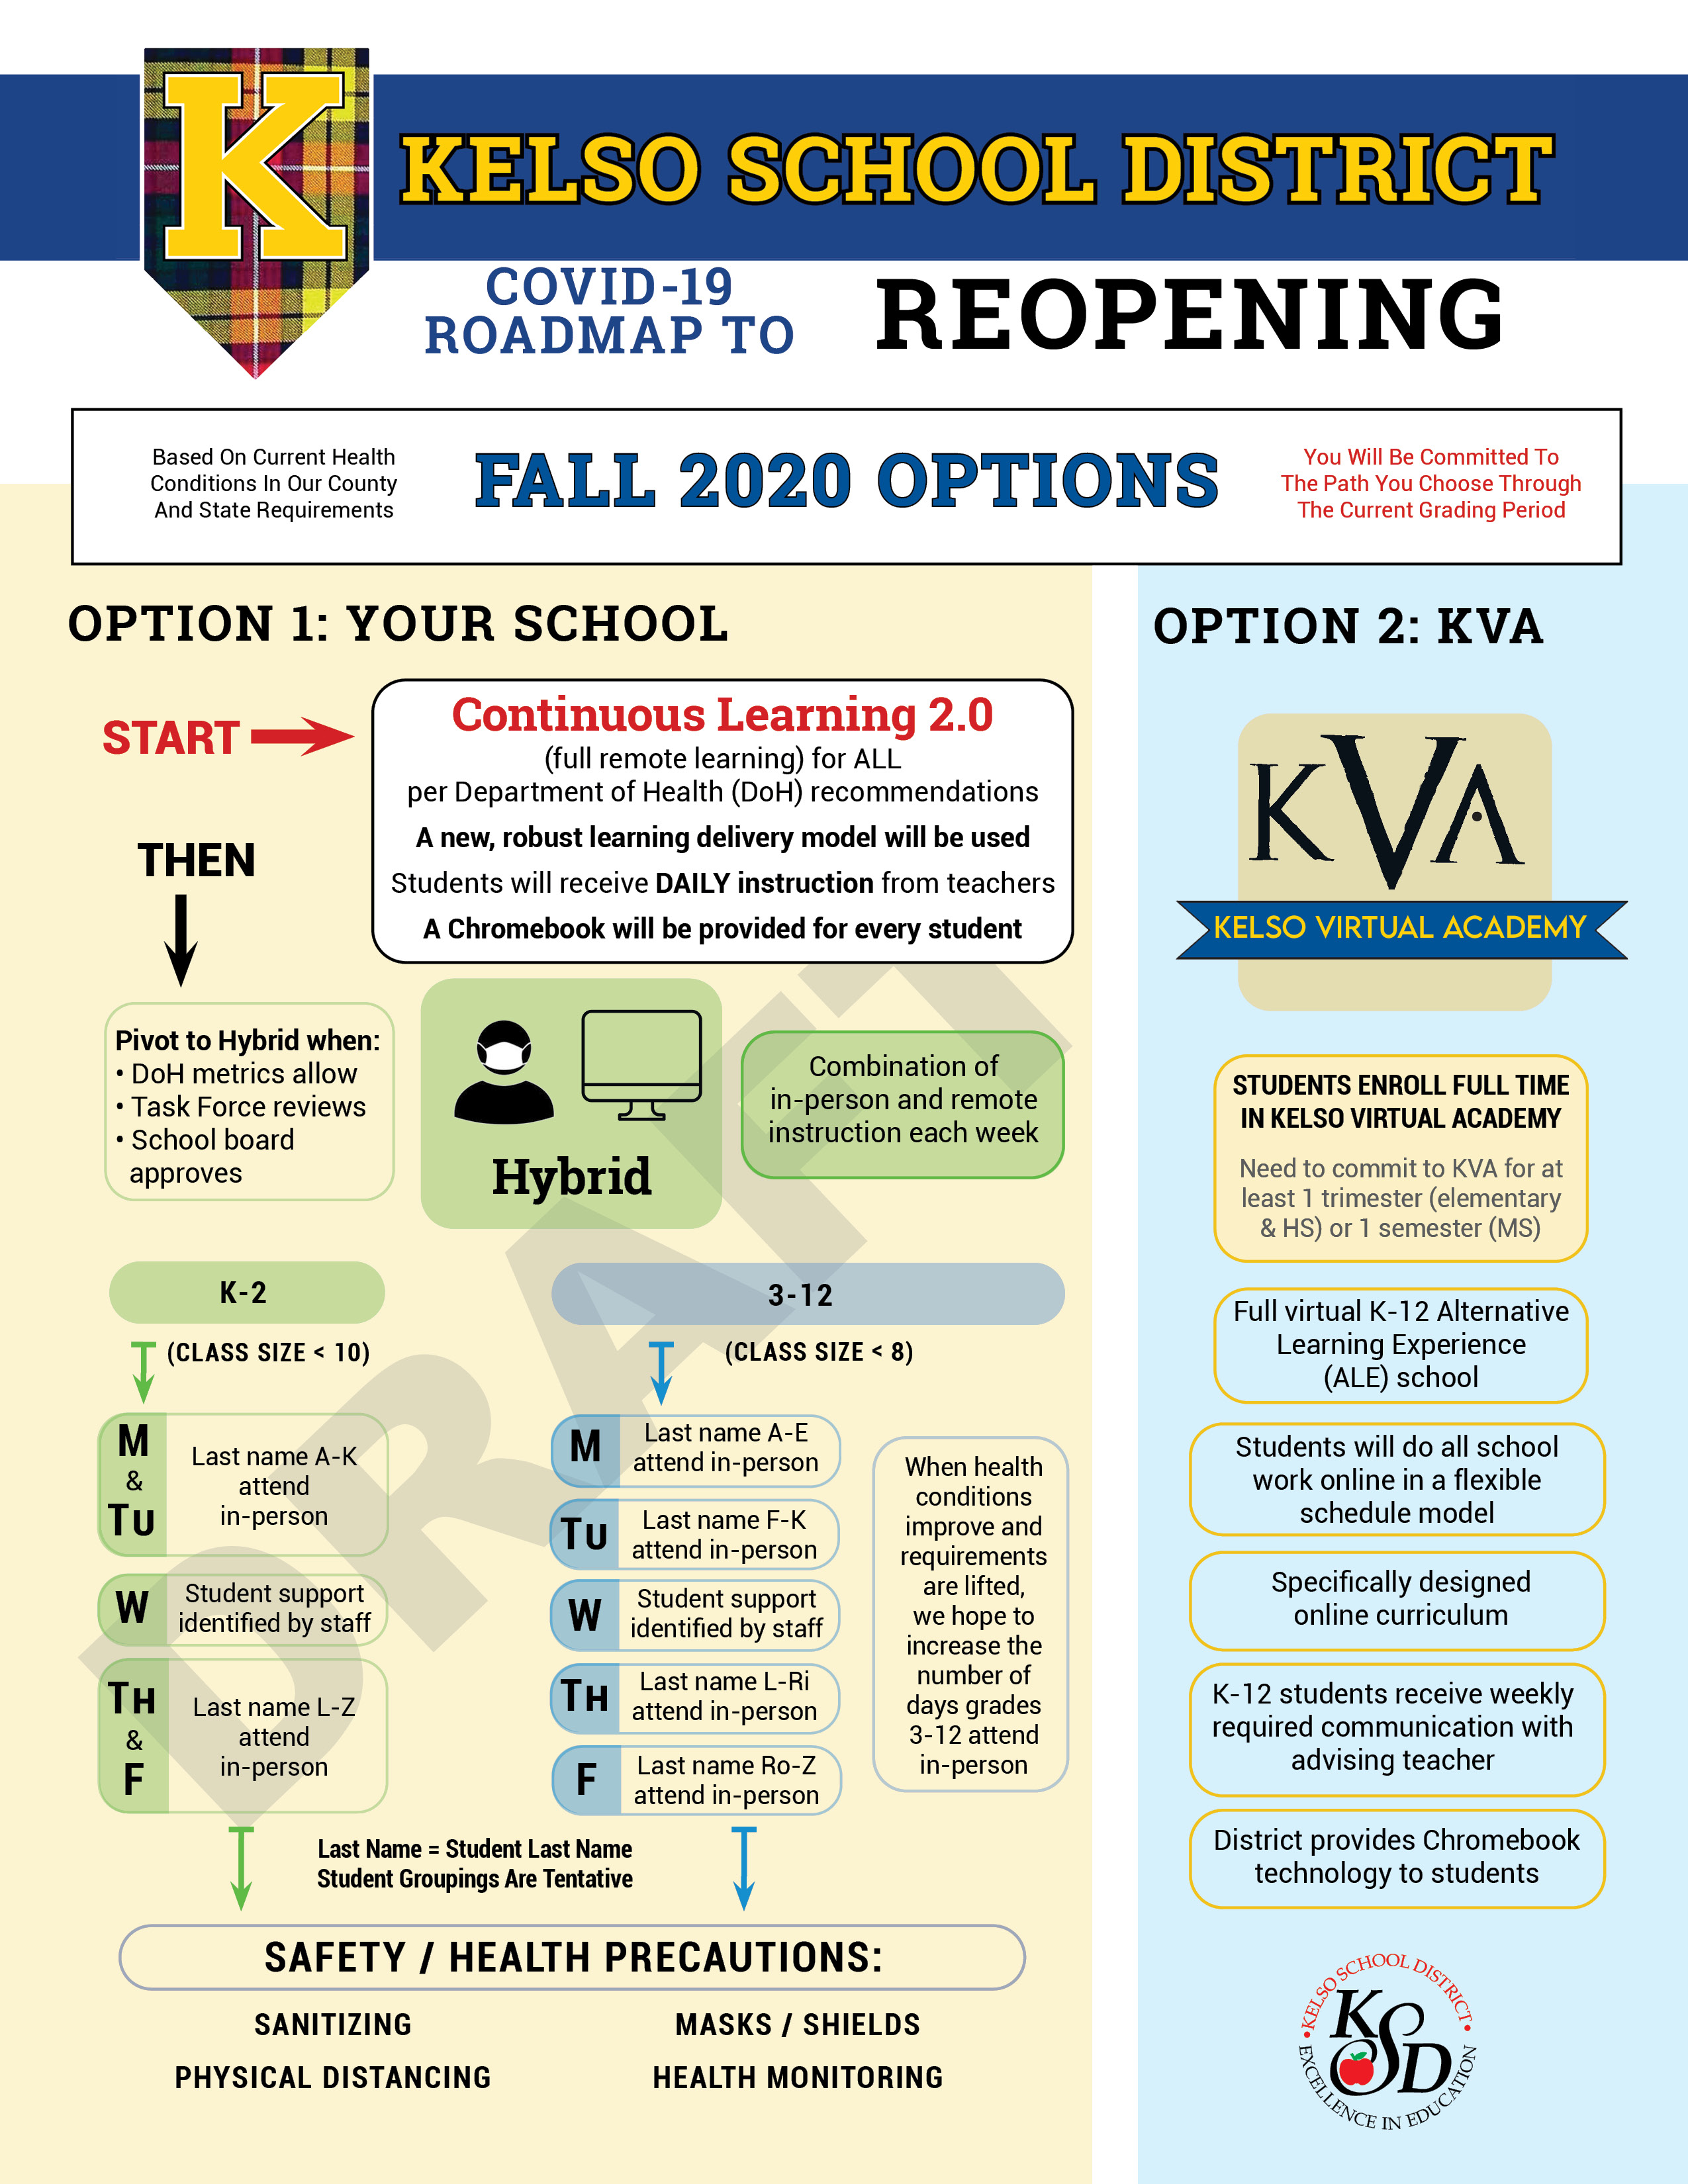 COVID-19 ROADMAP TO REOPENING INFORMATION